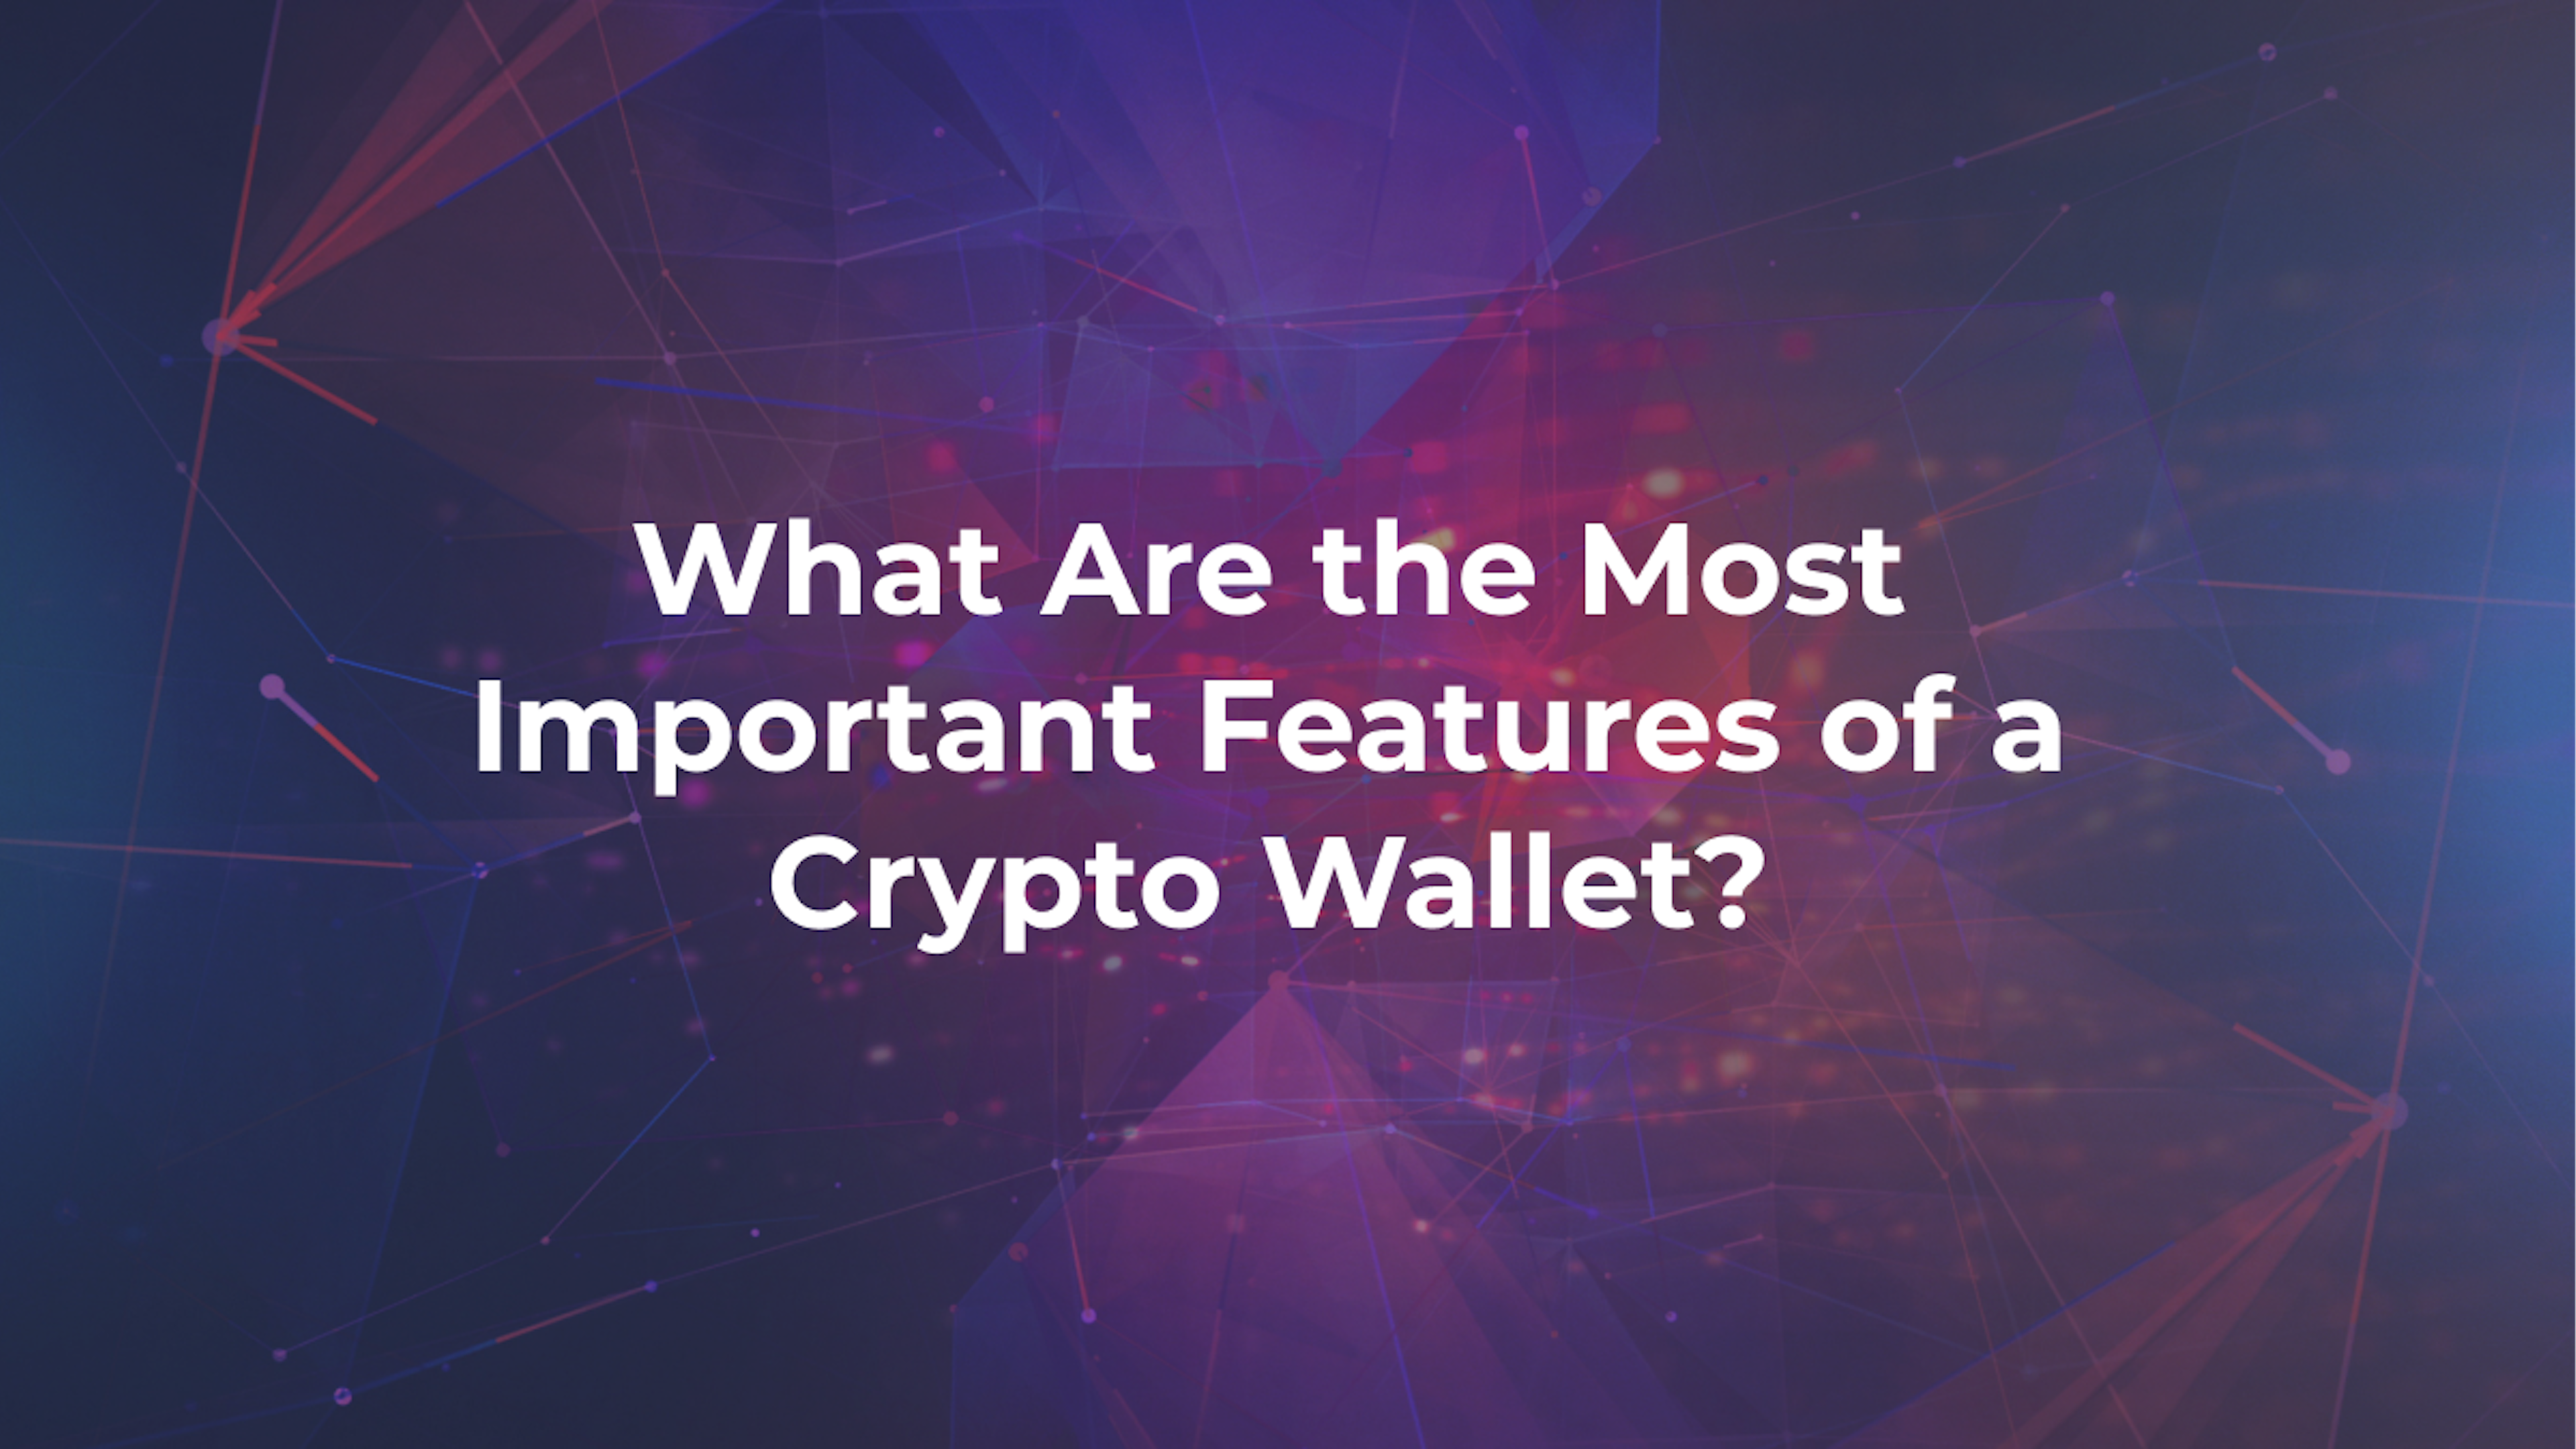 What Are the Most Important Features of a Crypto Wallet?